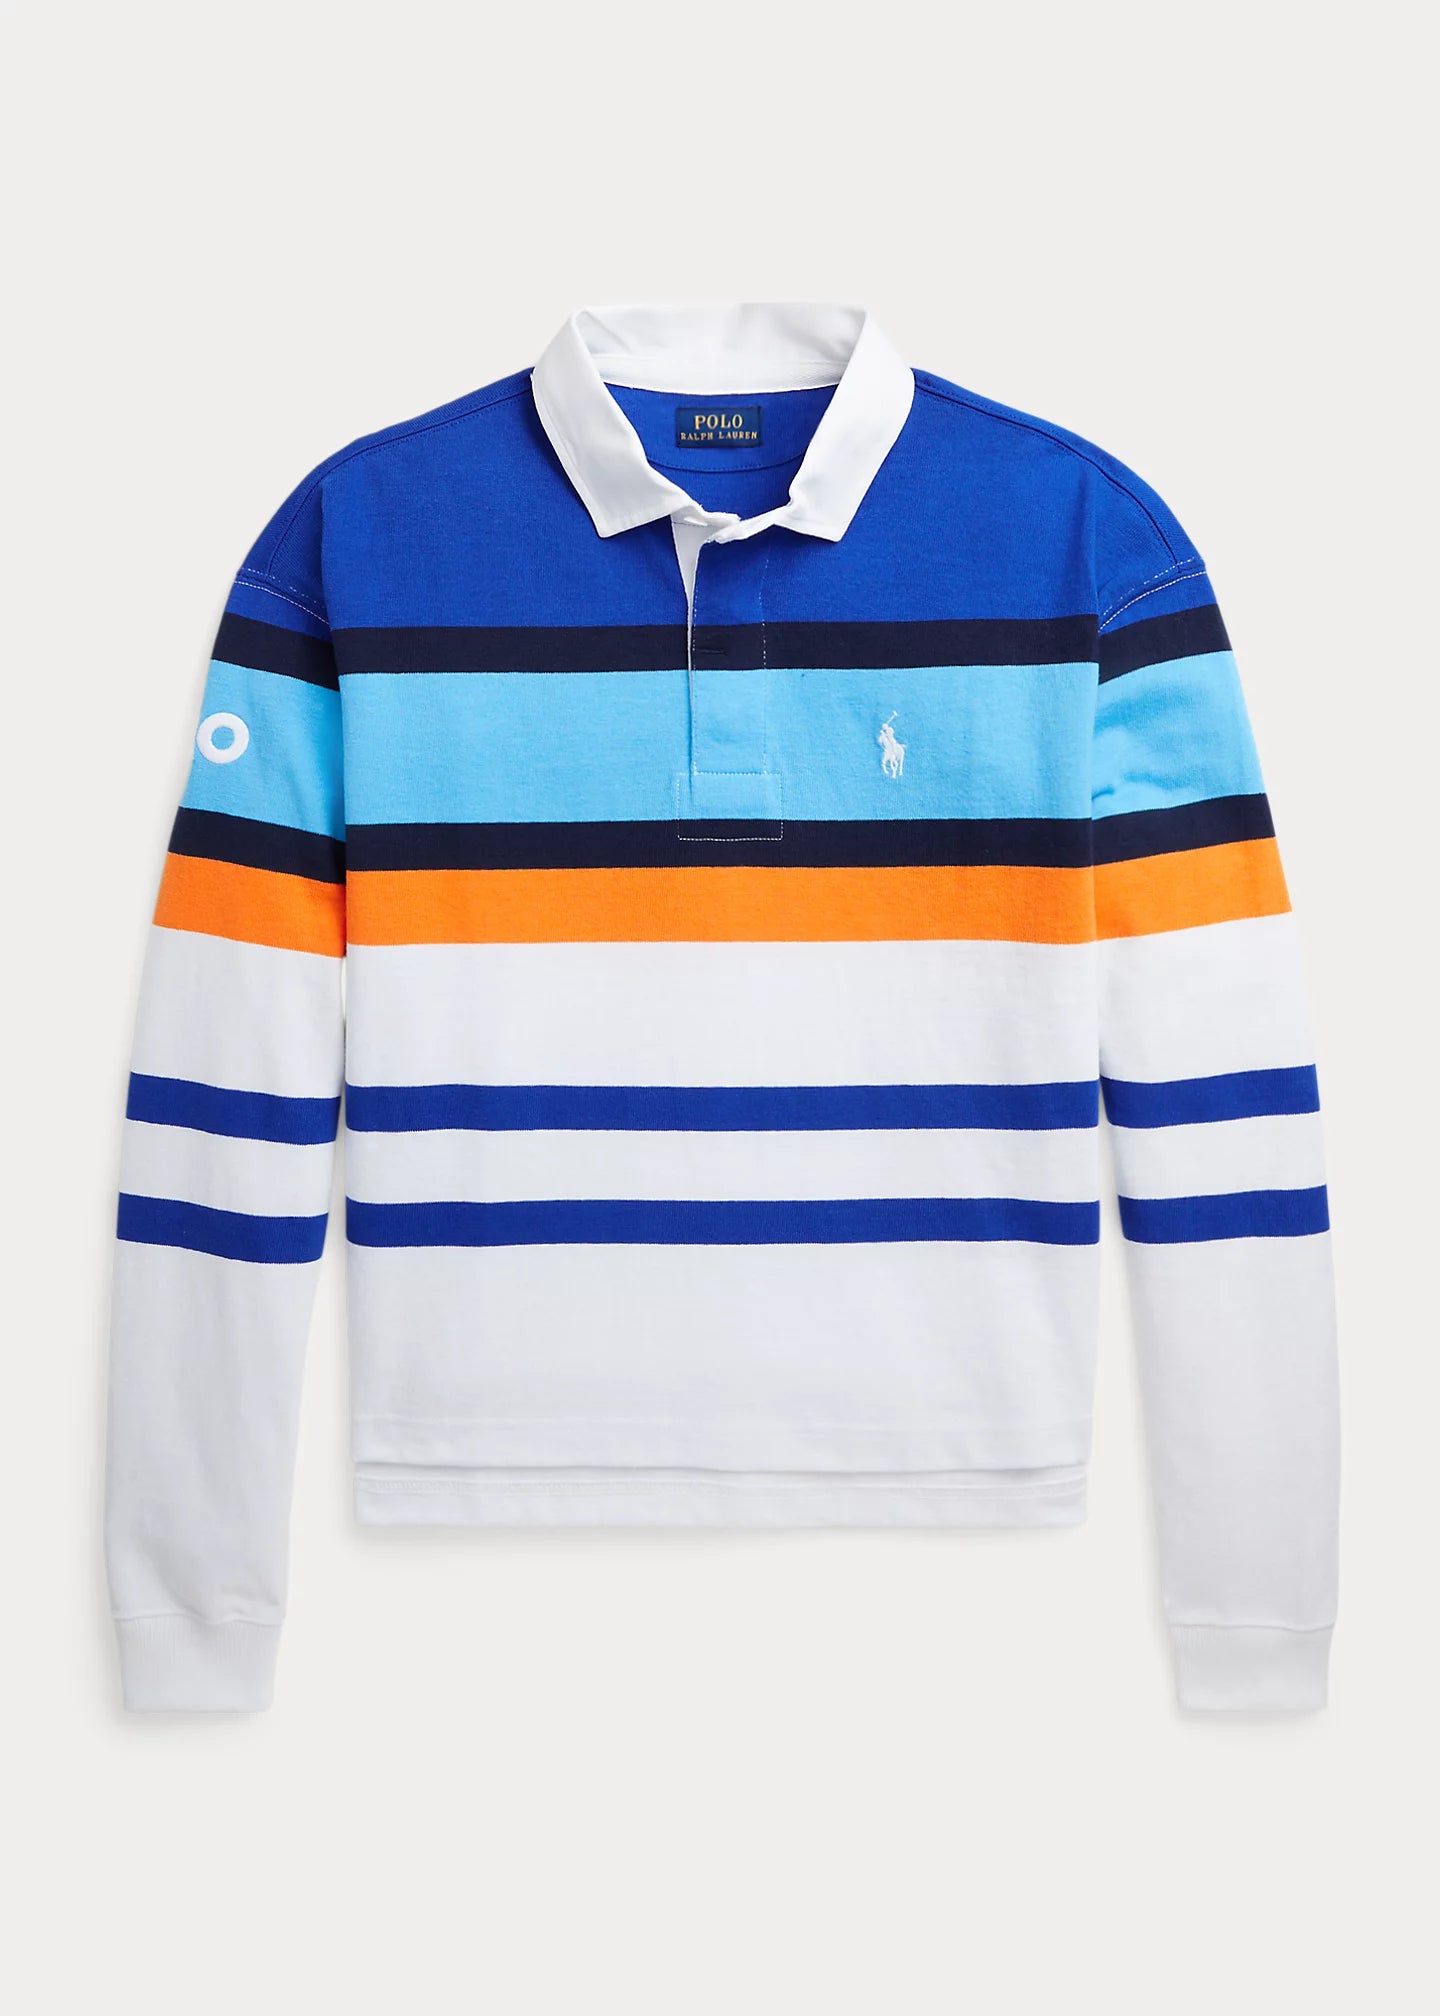 Women's Cropped Rugby Shirt Striped